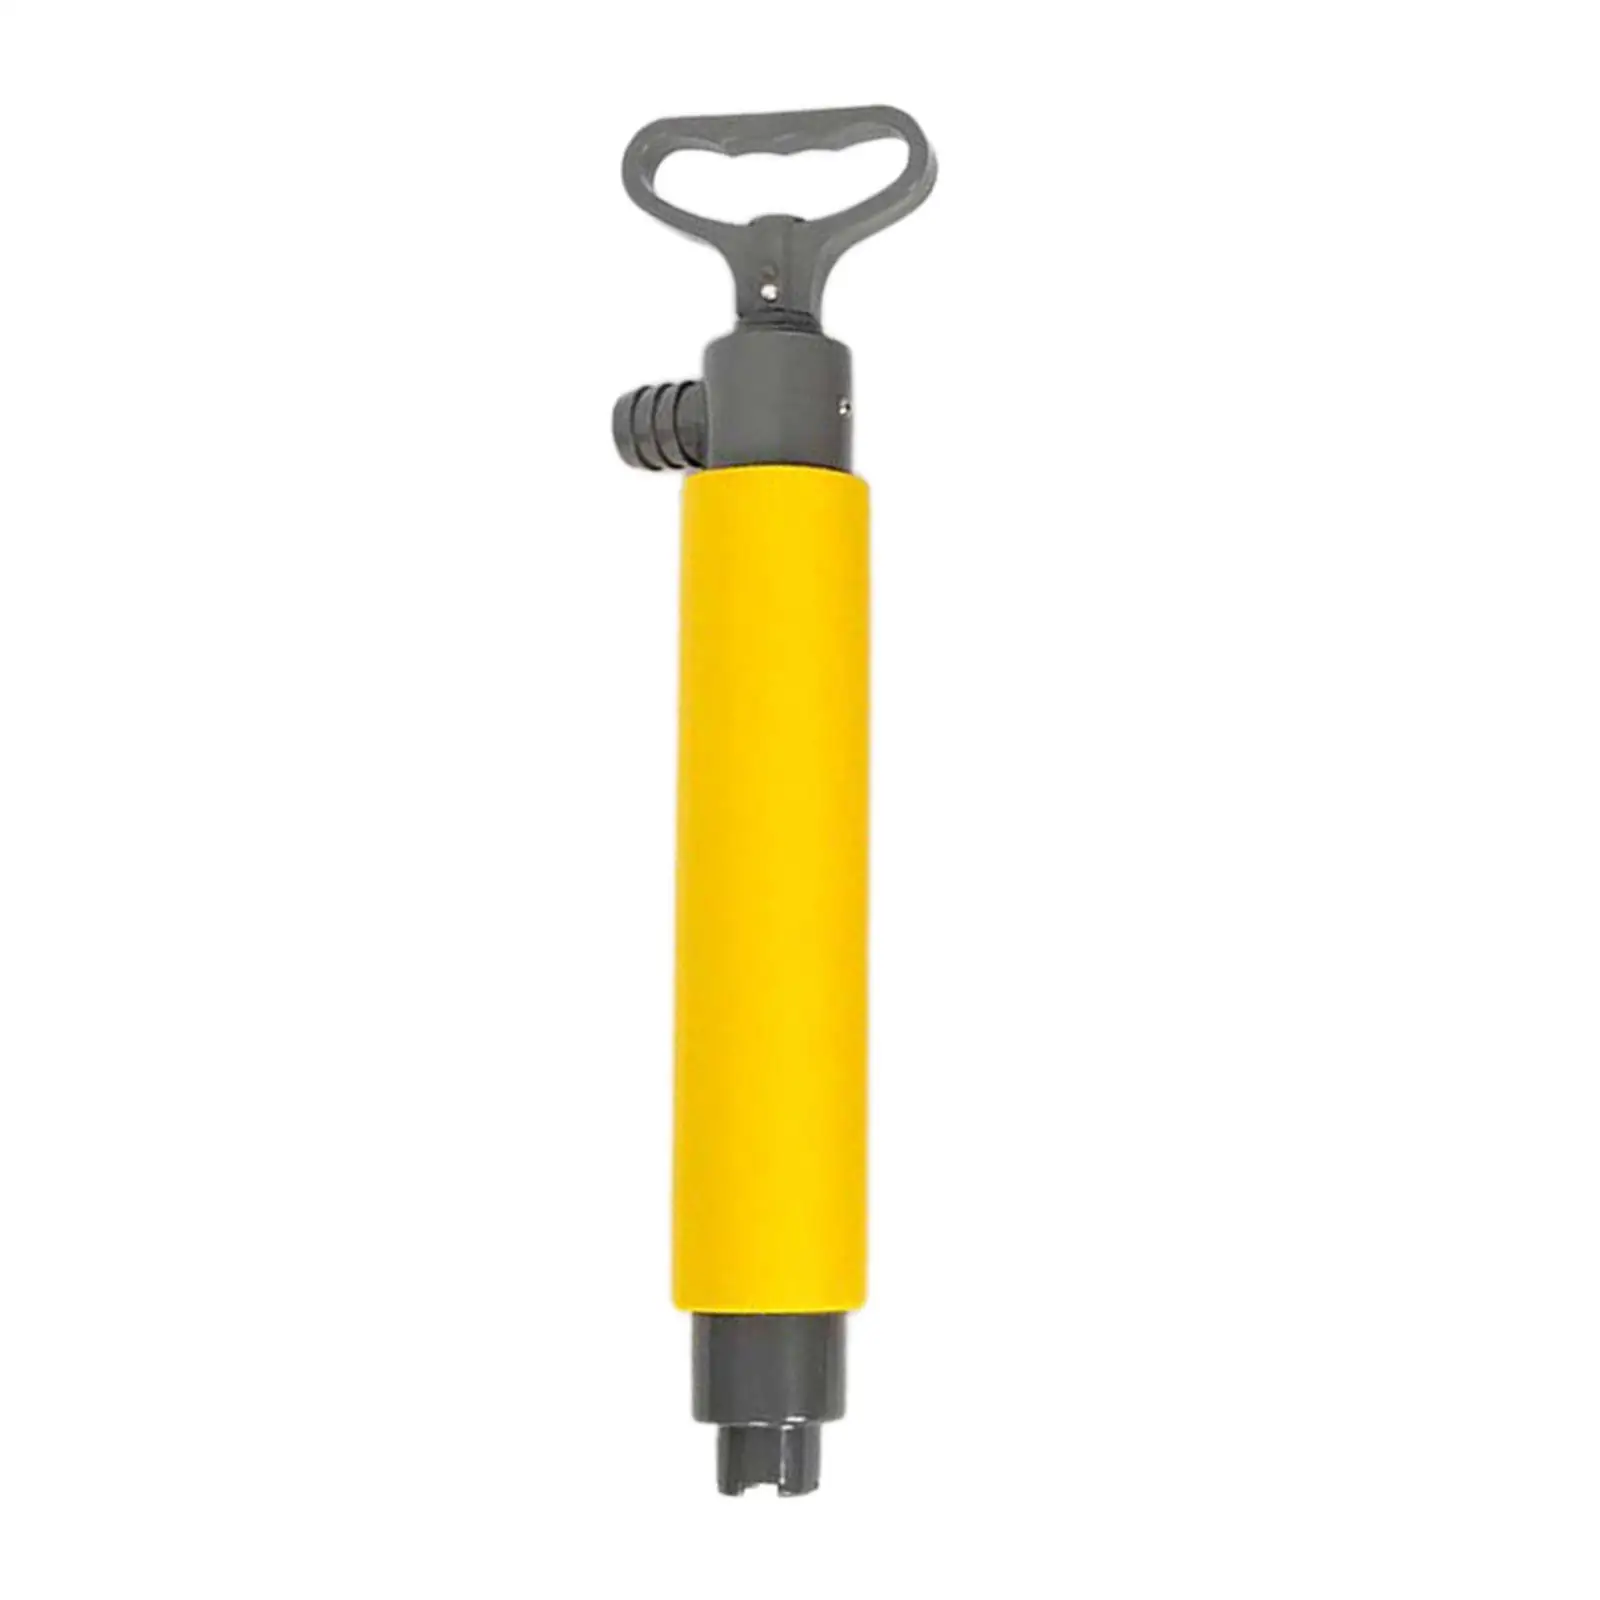 Paddler`s hand pump, kayak pump, floating small sump pump, easy-to-hold boat